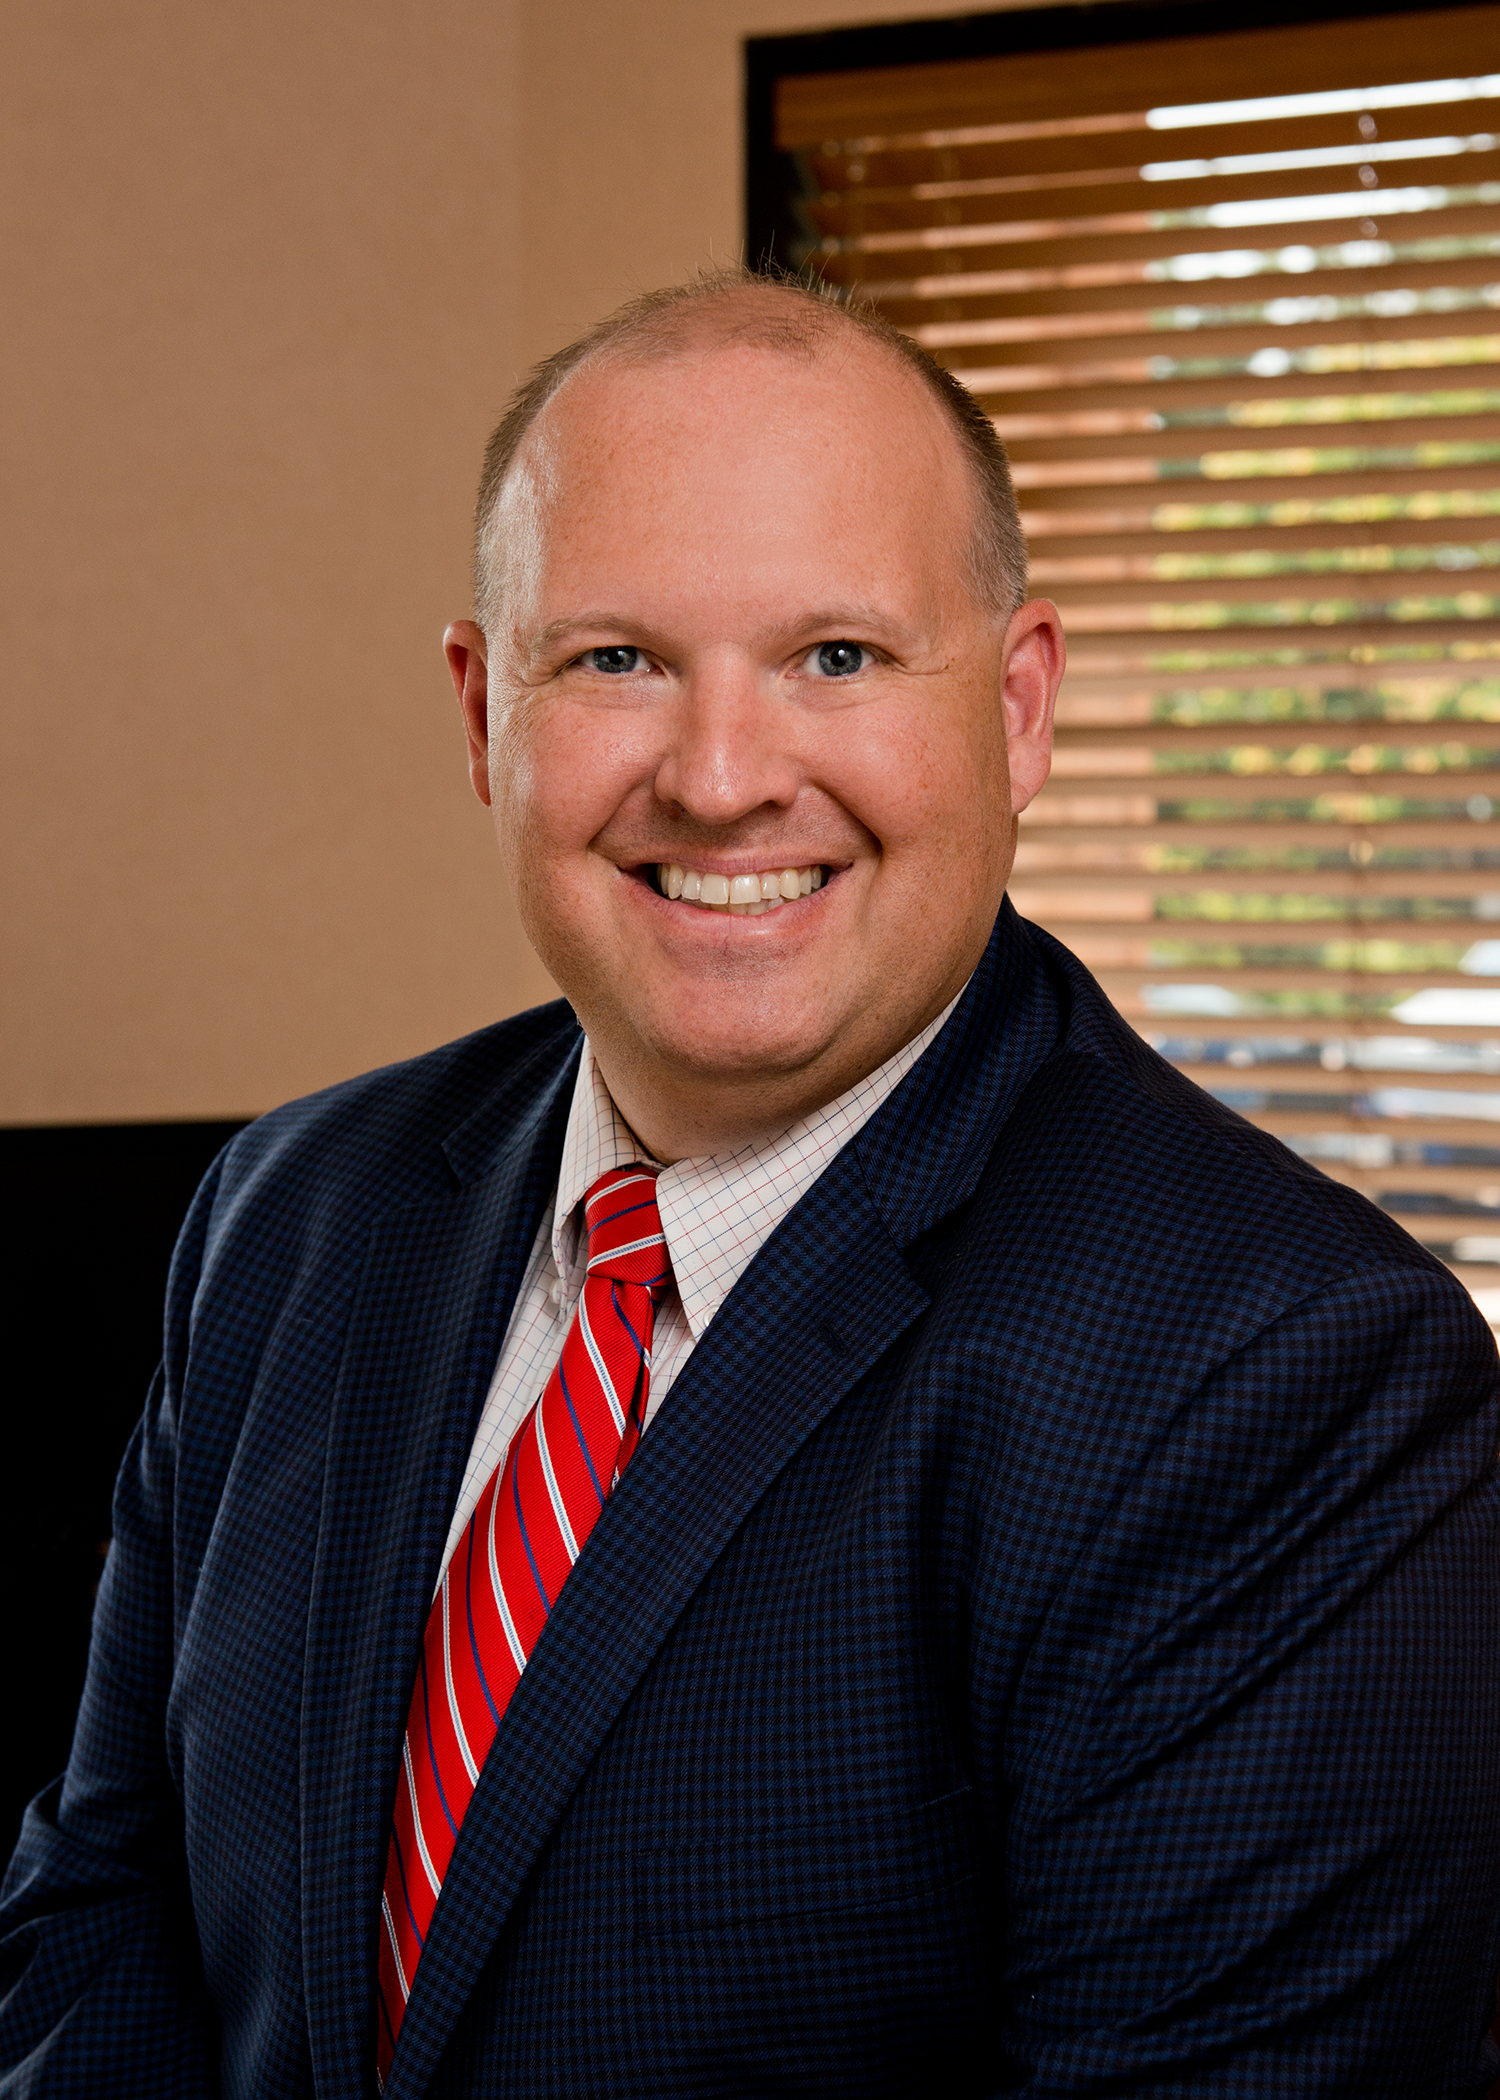 Luke Smith named Vice President, Commercial Banking, at Academy Bank in Colorado Springs